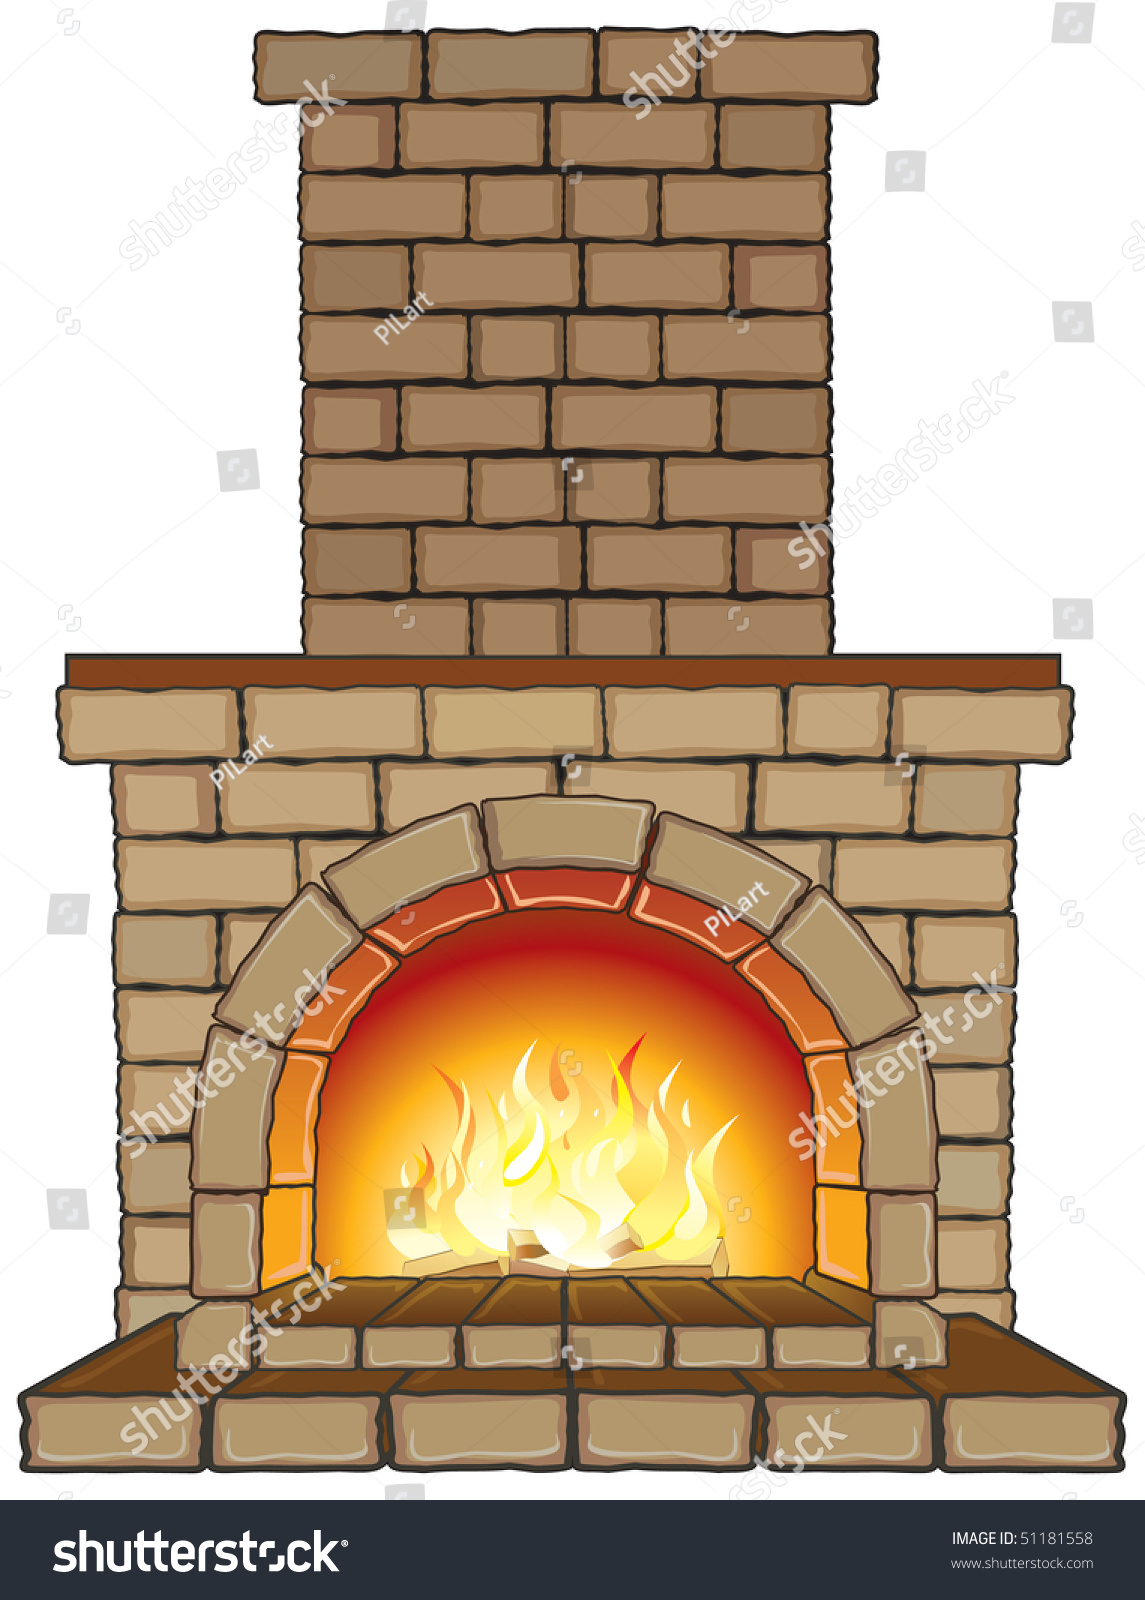 clipart fireplace winter - photo #47